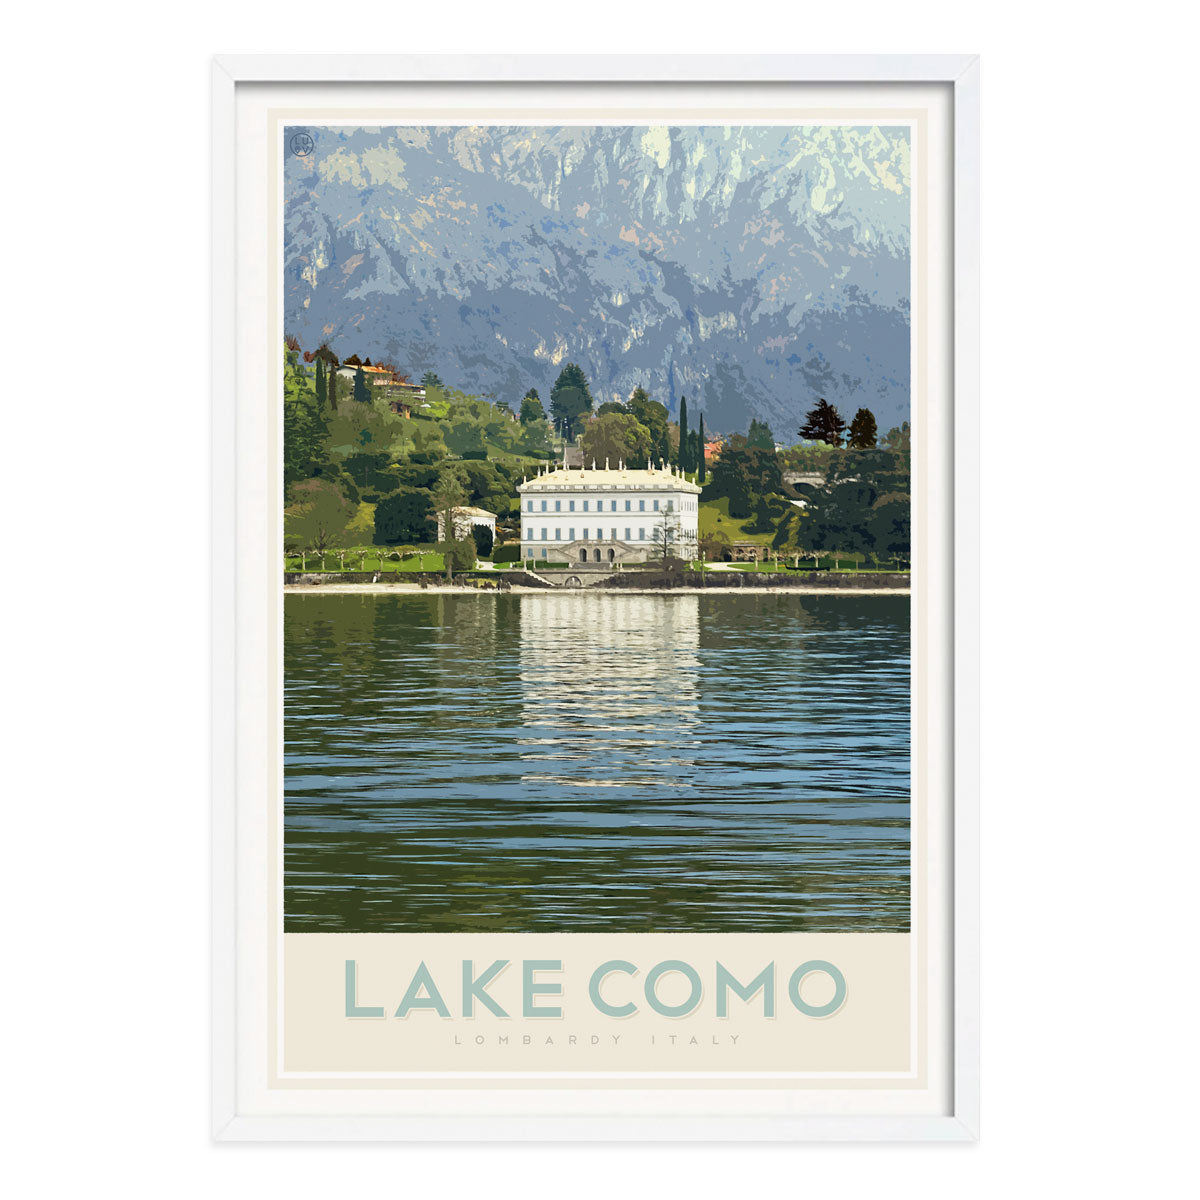 Lake Como Italy, vintage travel style white framed print by places we luv